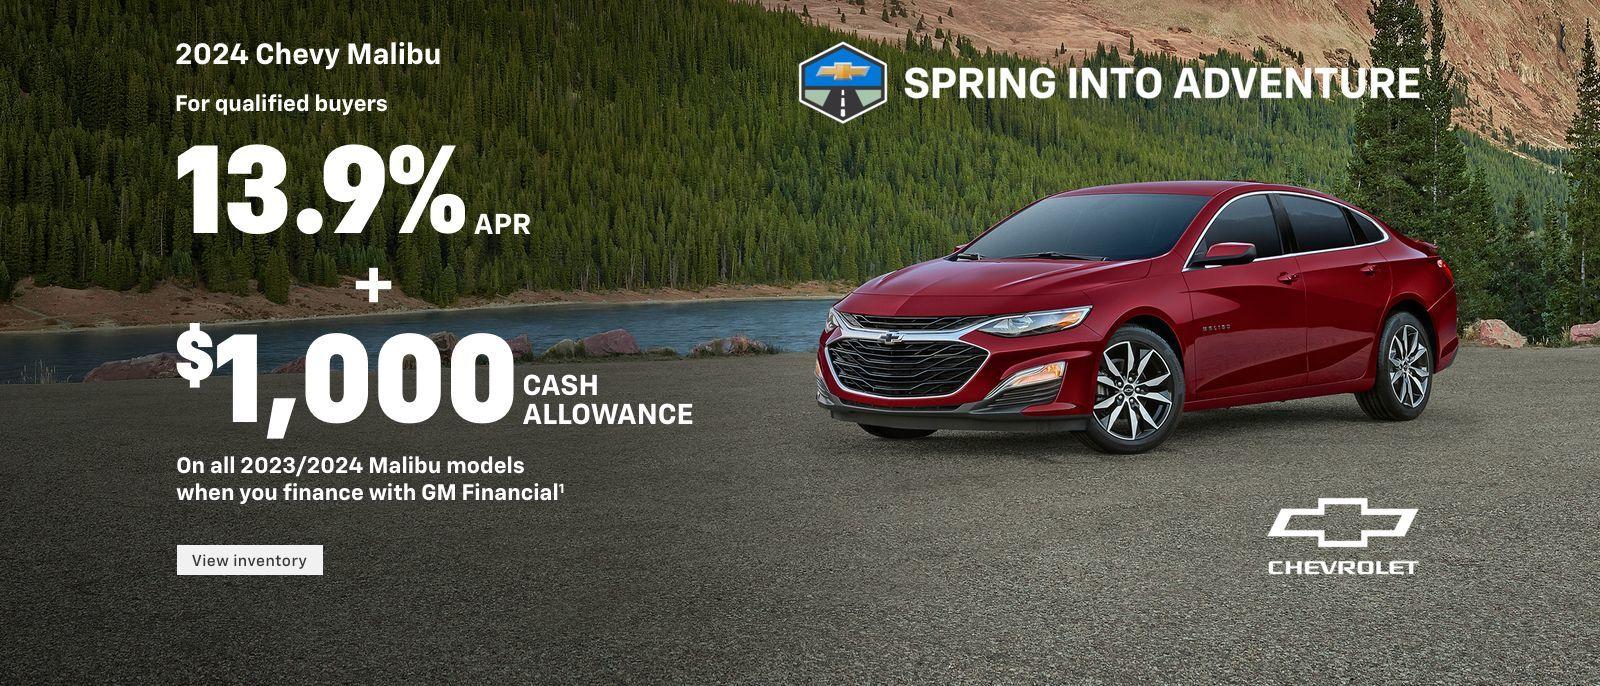 2024 Chevy Malibu LT. For qualified buyers 13.9% APR. Or, $1,000 cash allowance on all 2023/2024 Malibu models when you finance with GM Financial.